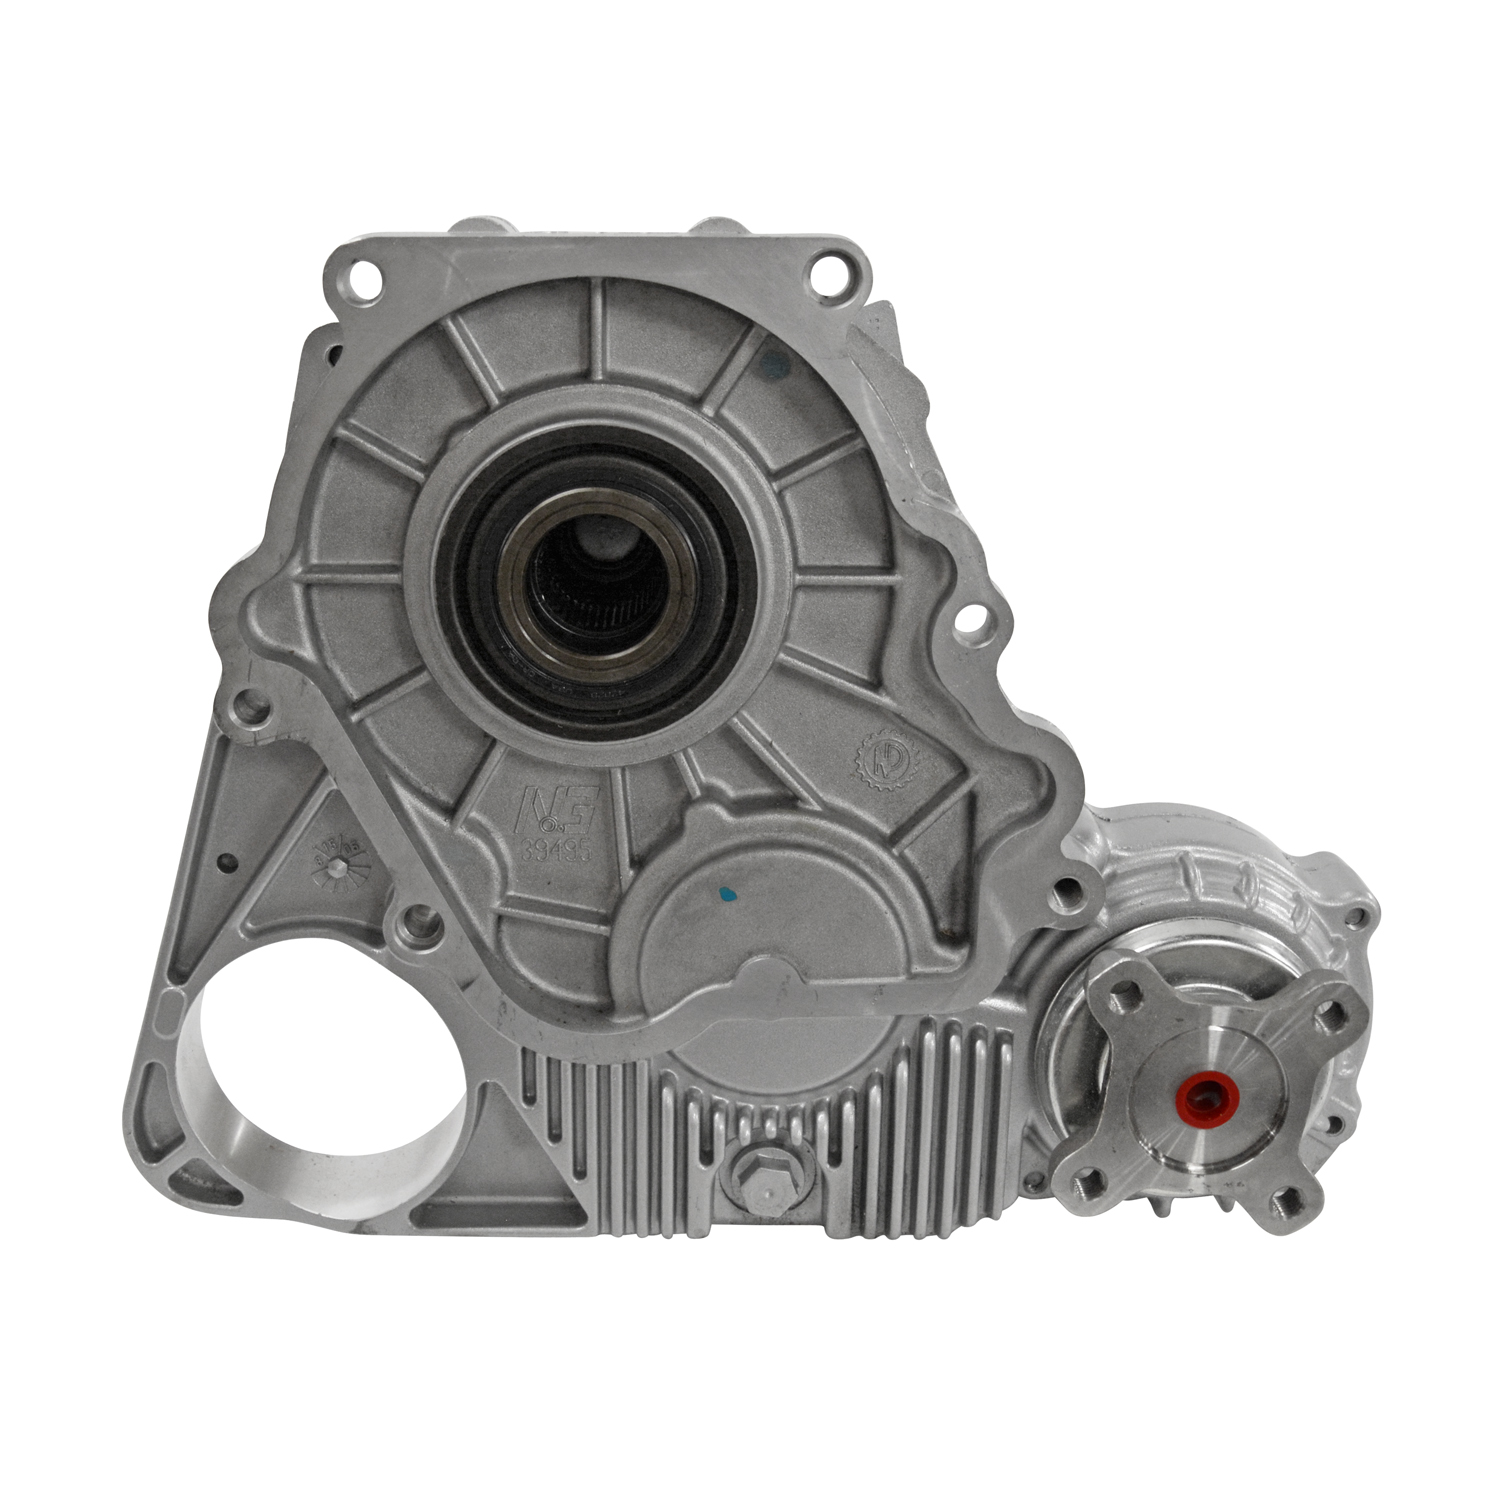 Transfer Case for 2001-2003 BMW 325I and 330I, Automatic